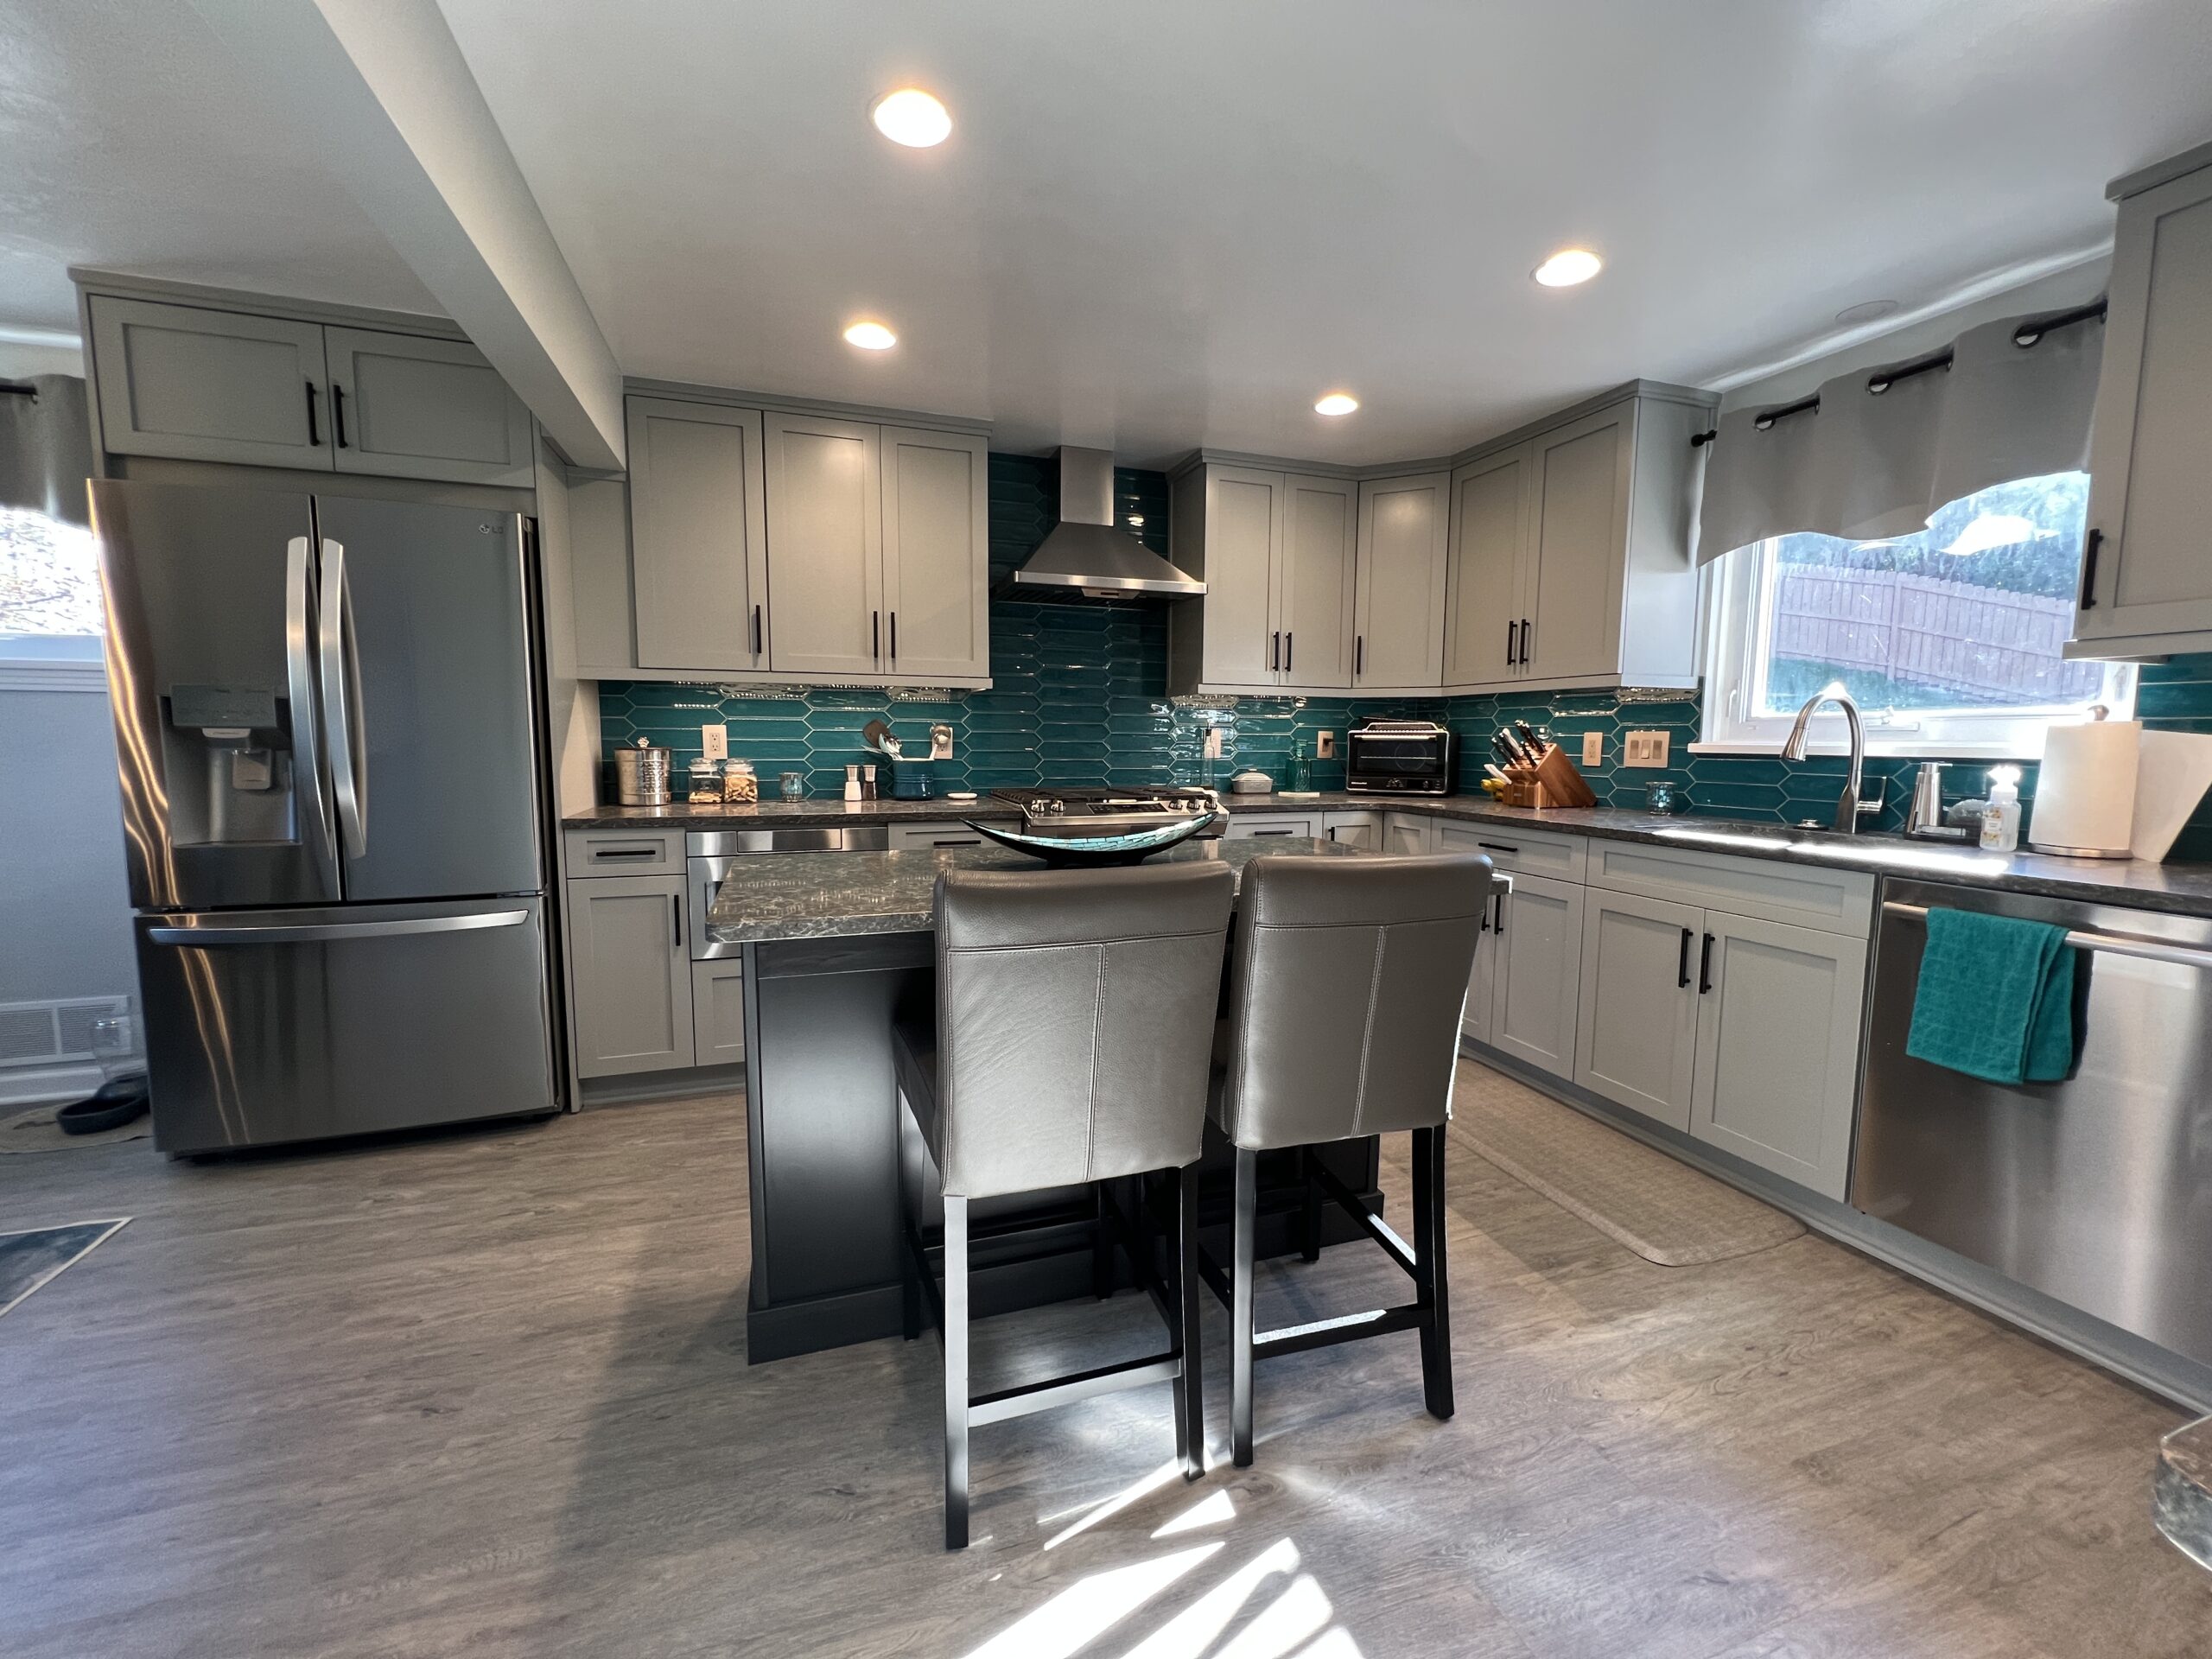 Classic full kitchen remodel, blue teal tiles, little grey marble island, storage cabinets, spacious counter